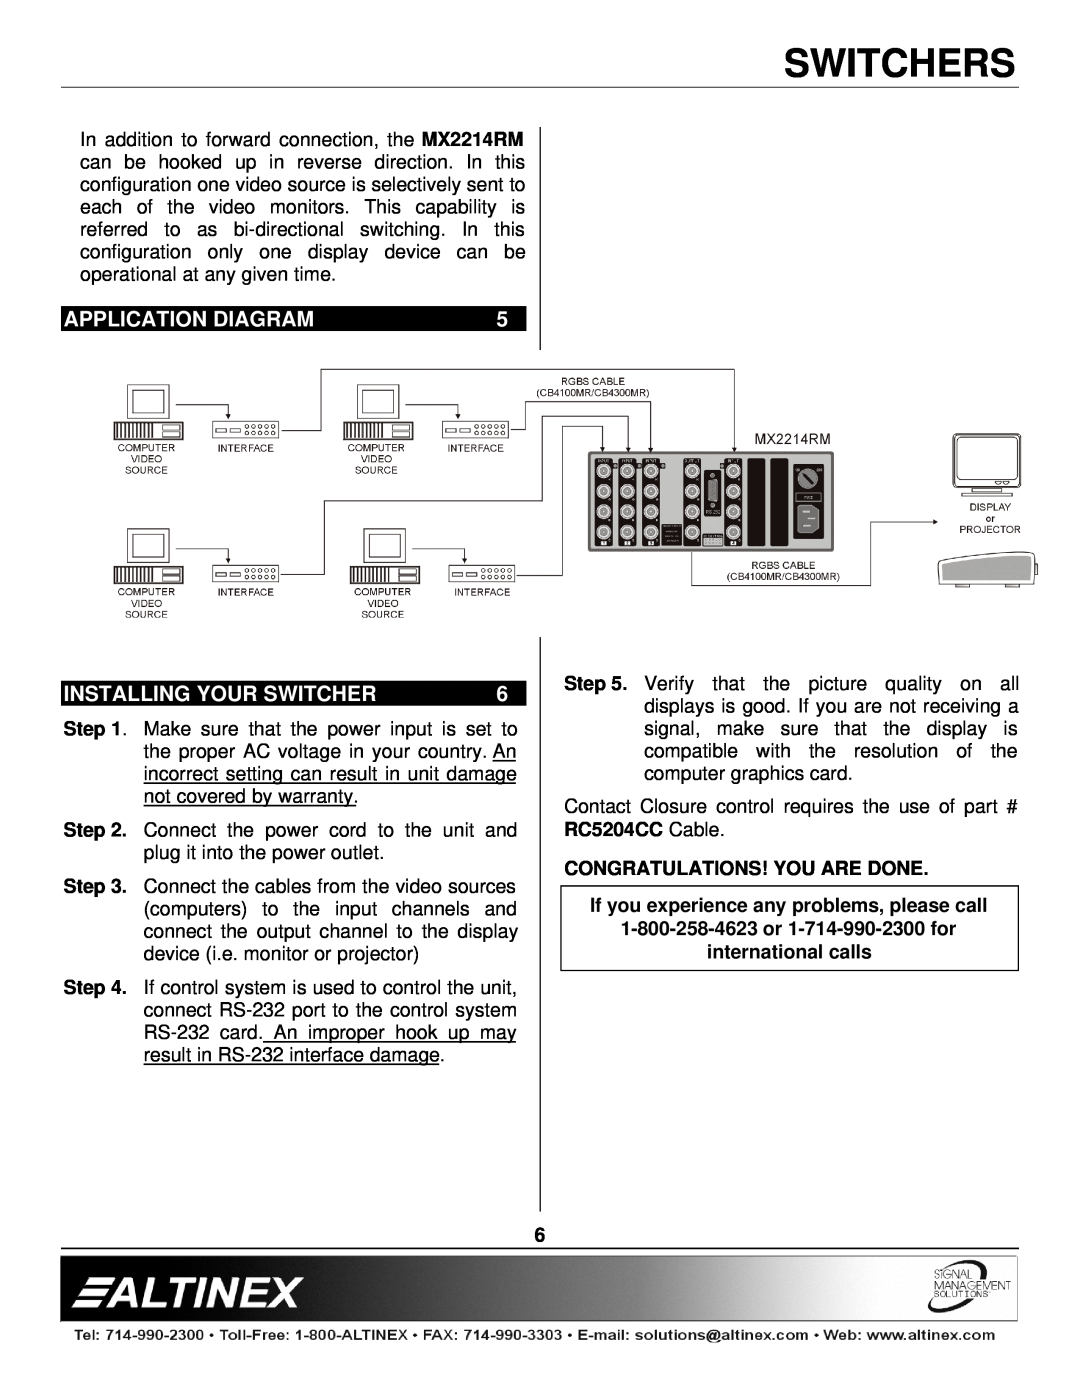 Altinex MX2214RM manual Application Diagram, Installing Your Switcher, Congratulations! You Are Done, international calls 